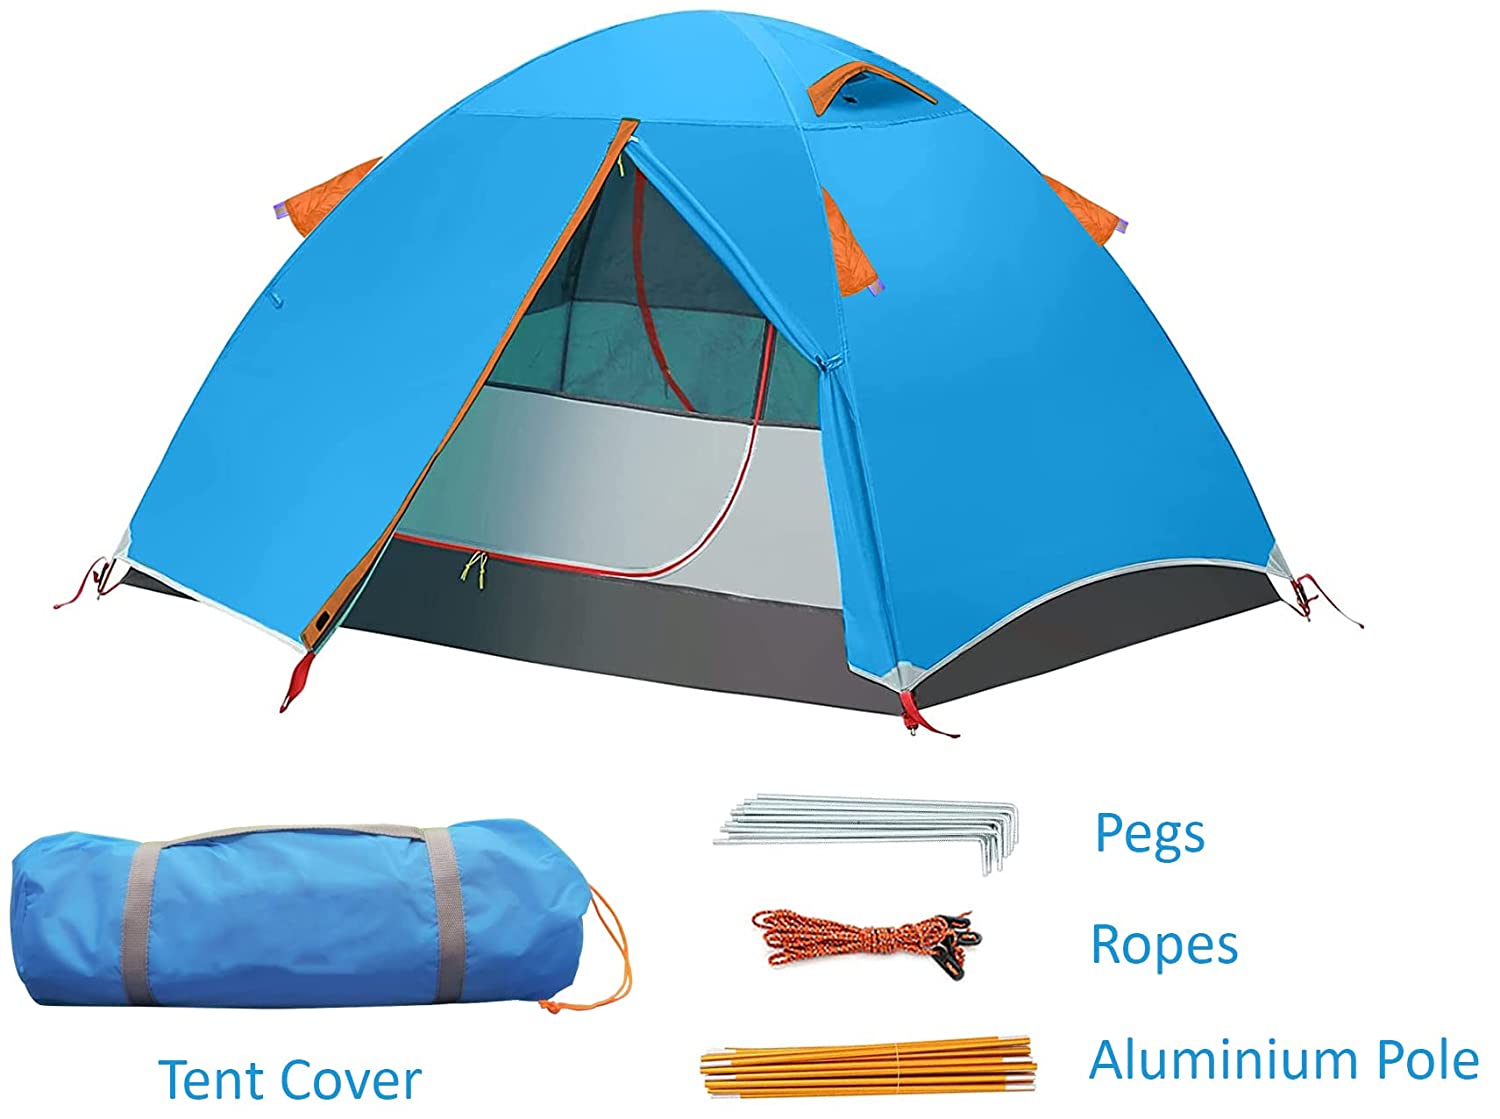 100% Waterproof Tent with Aluminum Pole